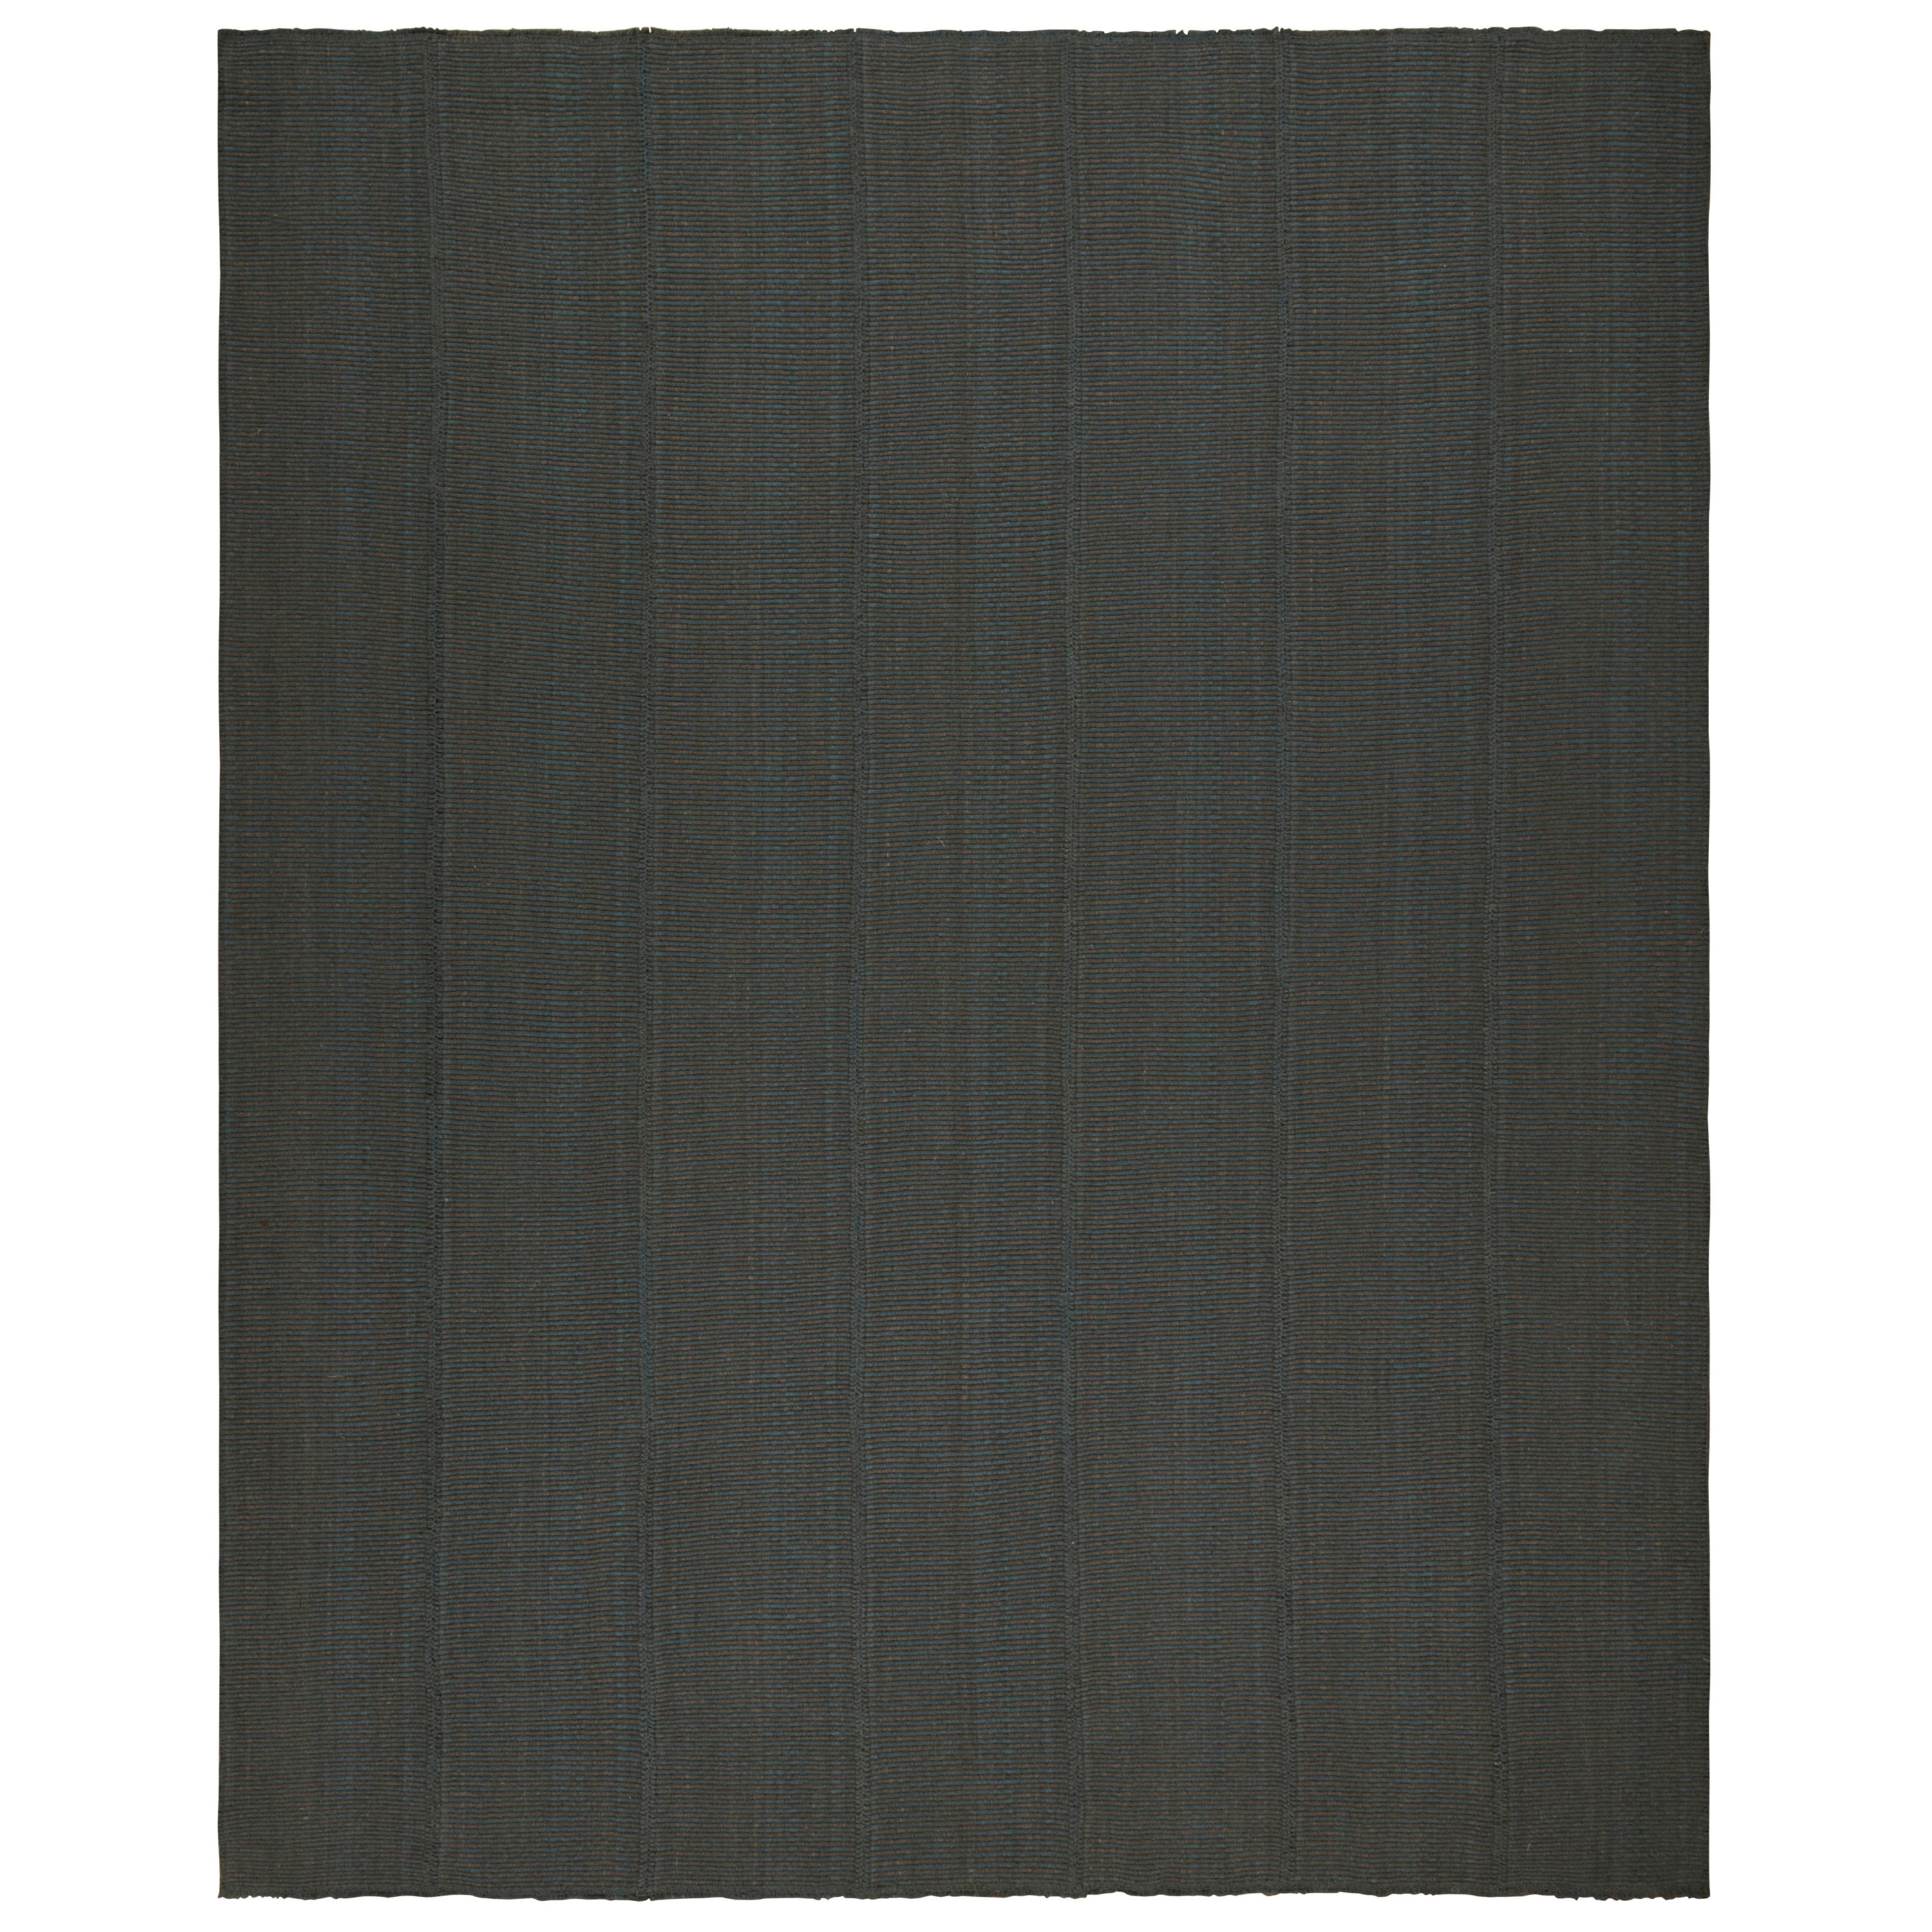 Rug & Kilim’s Contemporary Kilim in Black, with Blue Accents